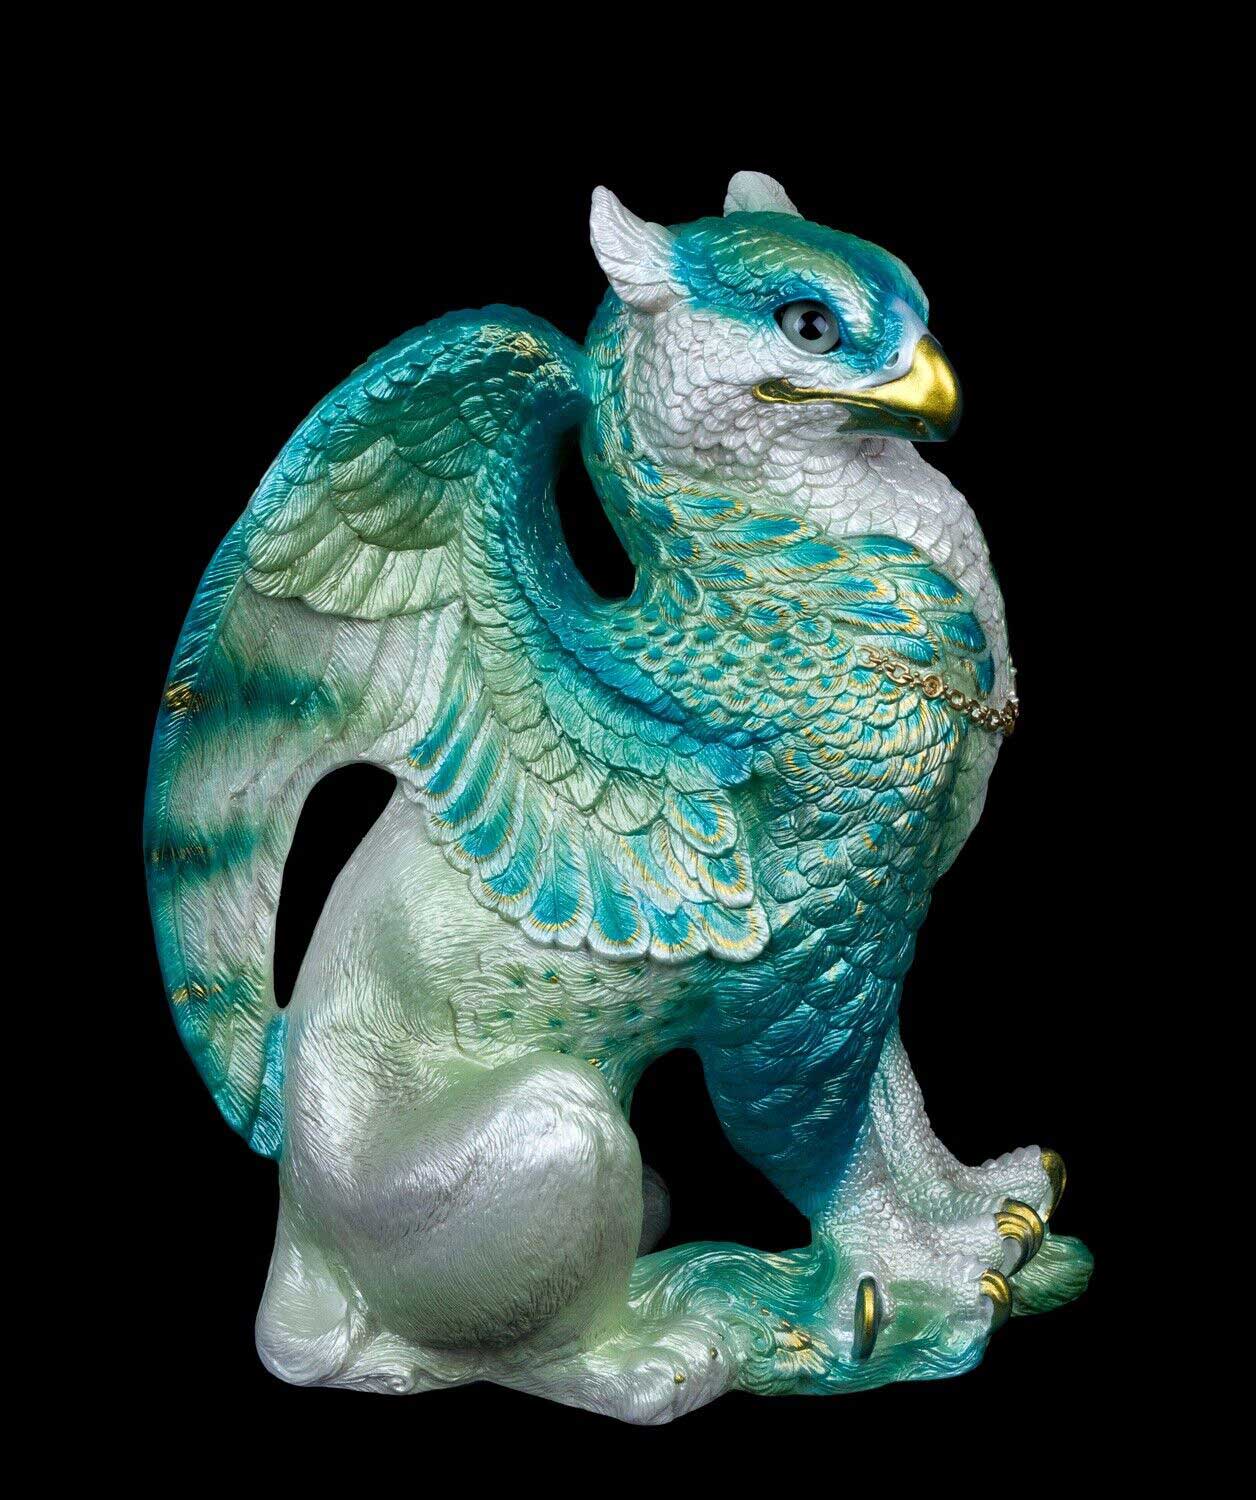 20230327-Seaglass-Male-Griffin-Test-Paint-1-by-Gina